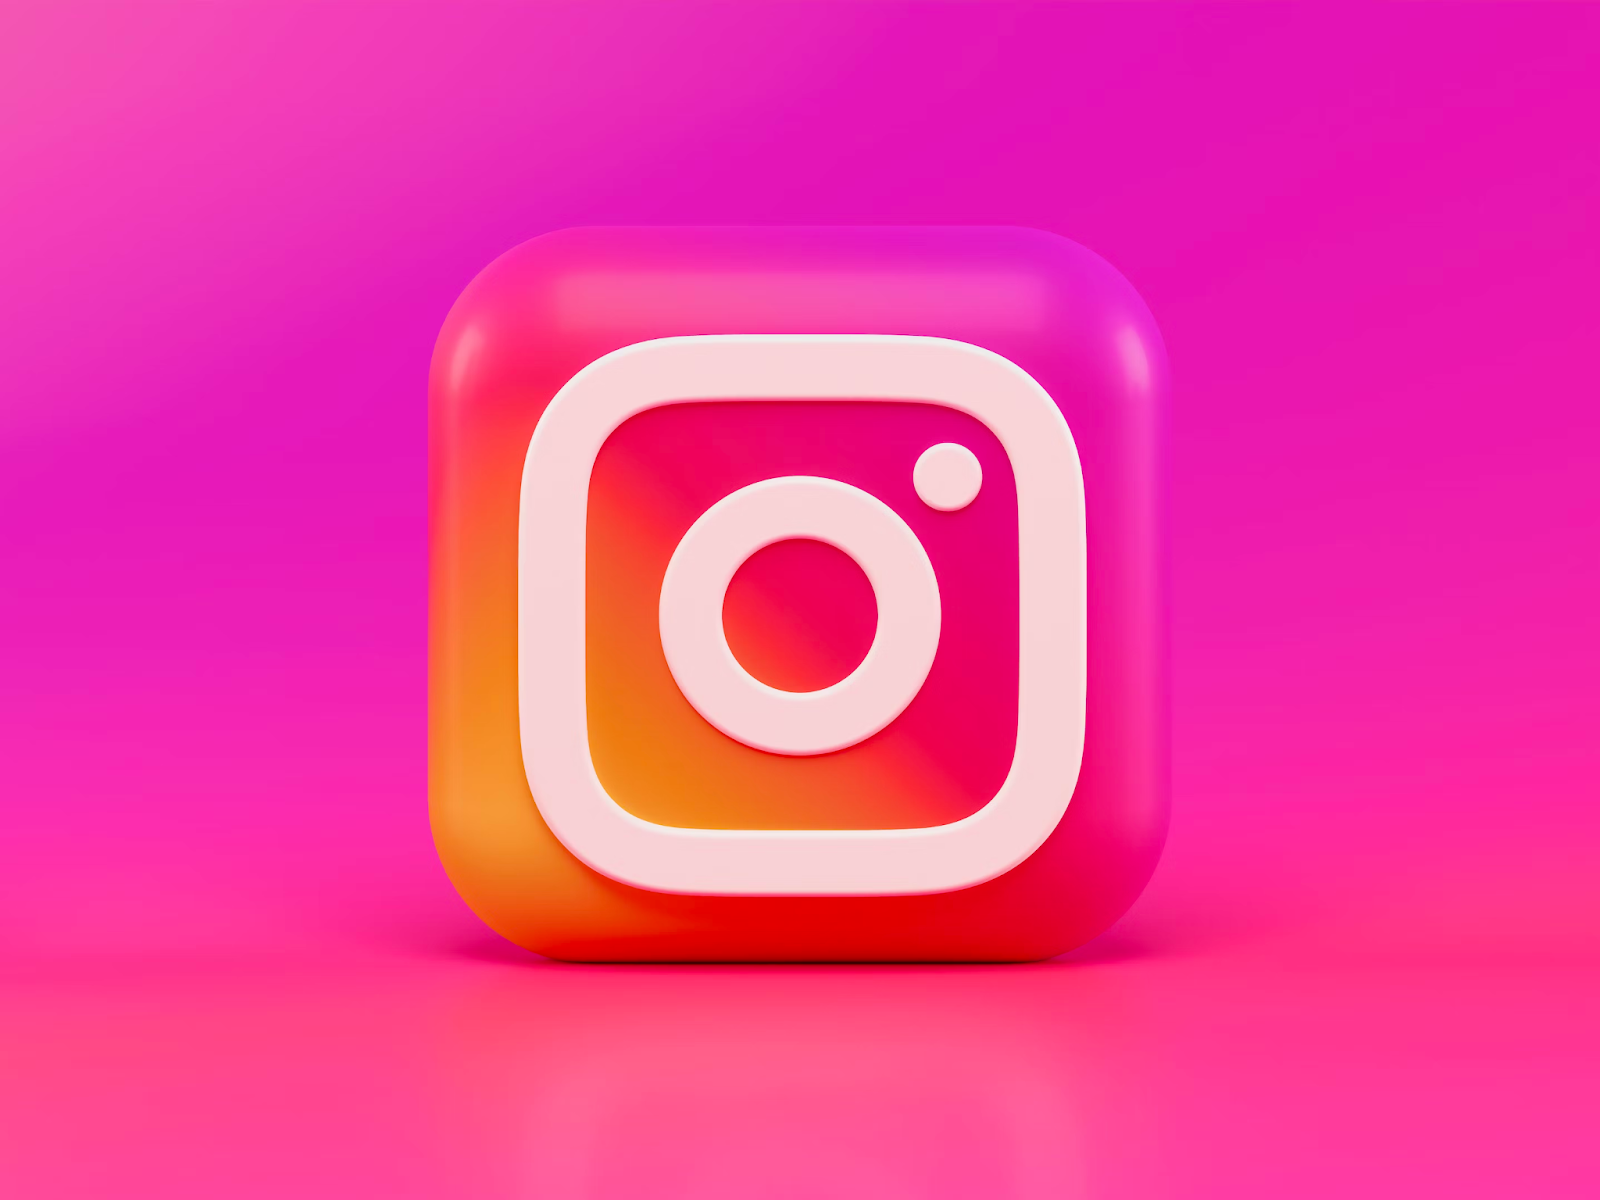 3D icon of Instagram social media app on a pink background